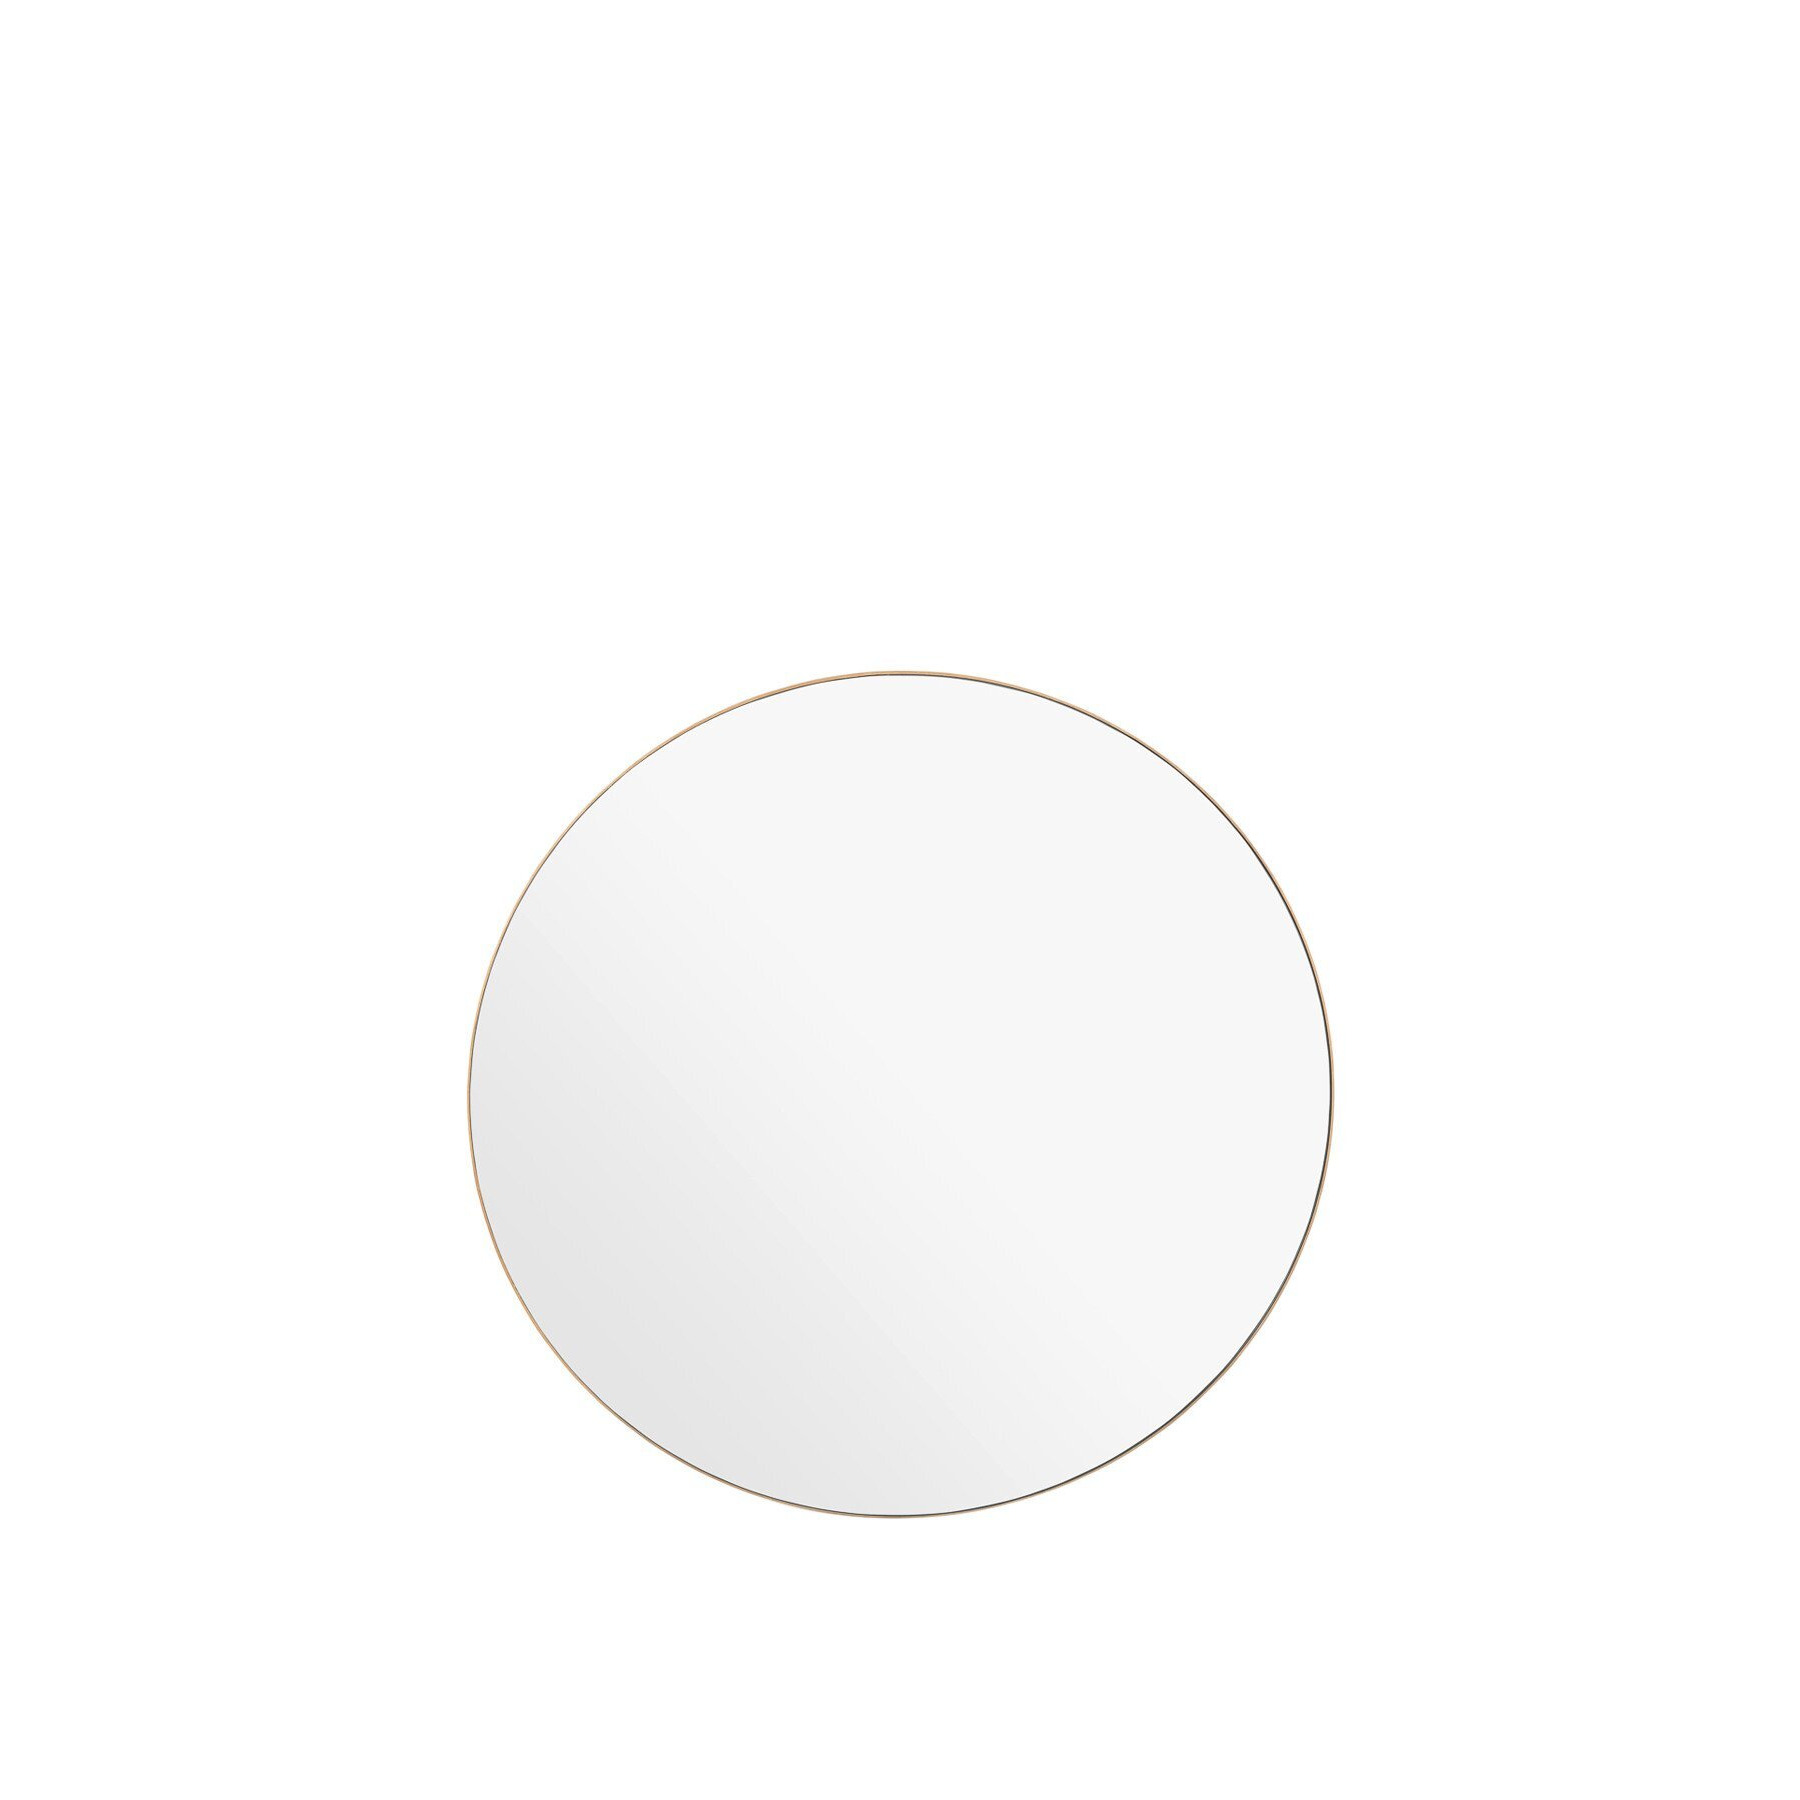 Heal's Fine Wood Mirror Round - Size Small Tan - image 1